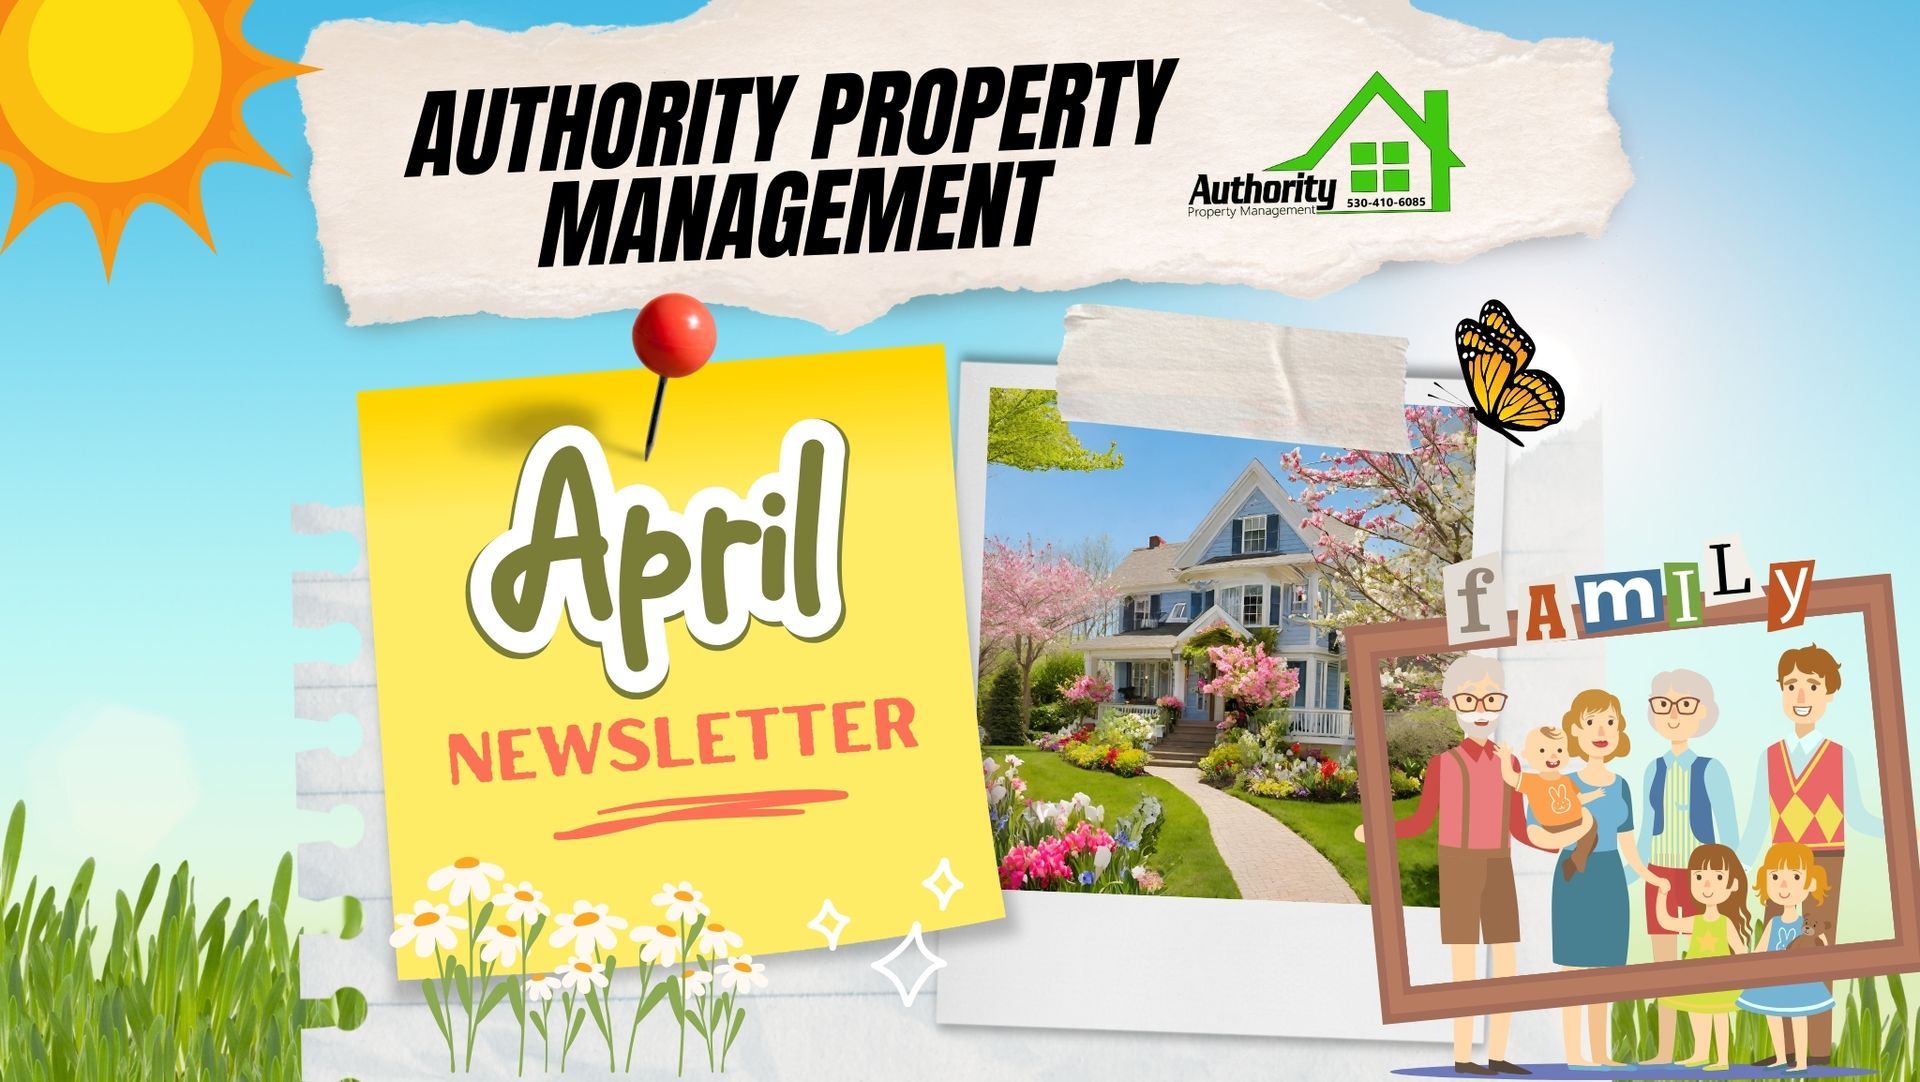 Collage with 'Authority Property Management' logo, 'April Newsletter' on a yellow note, blooming house, family drawing, sky backdrop, and a butterfly.
